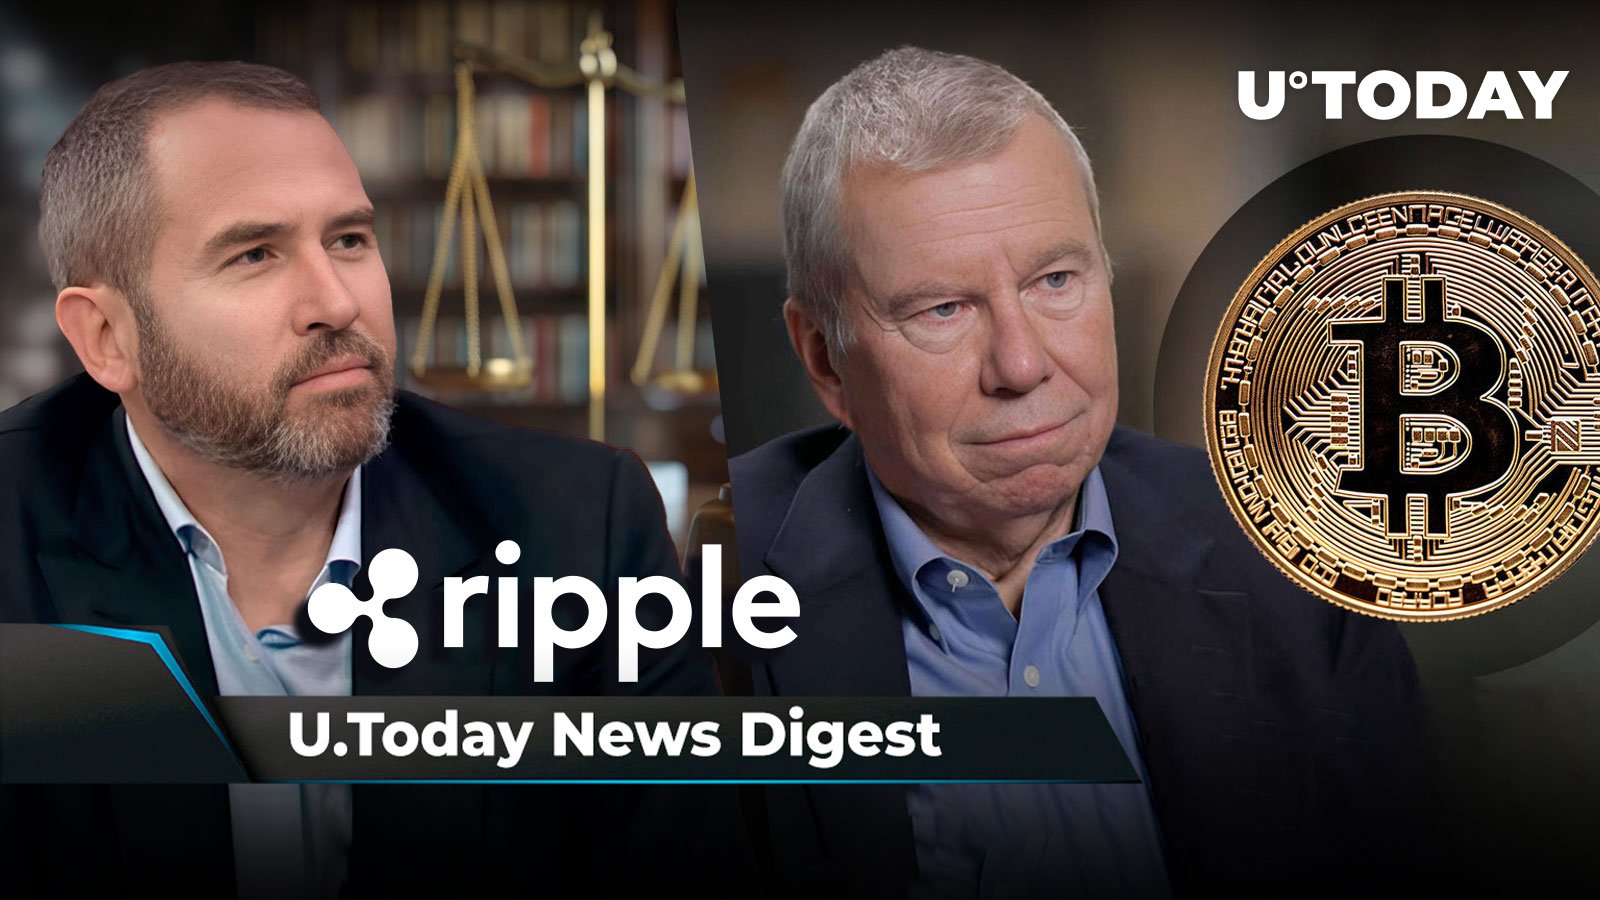 Ripple CEO Names Most Important Date for XRP Holders, John Bollinger Breaks Silence on Bitcoin Price, Shiba Inu Might Reverse in Next 3 Days: Crypto News Digest by U.Today